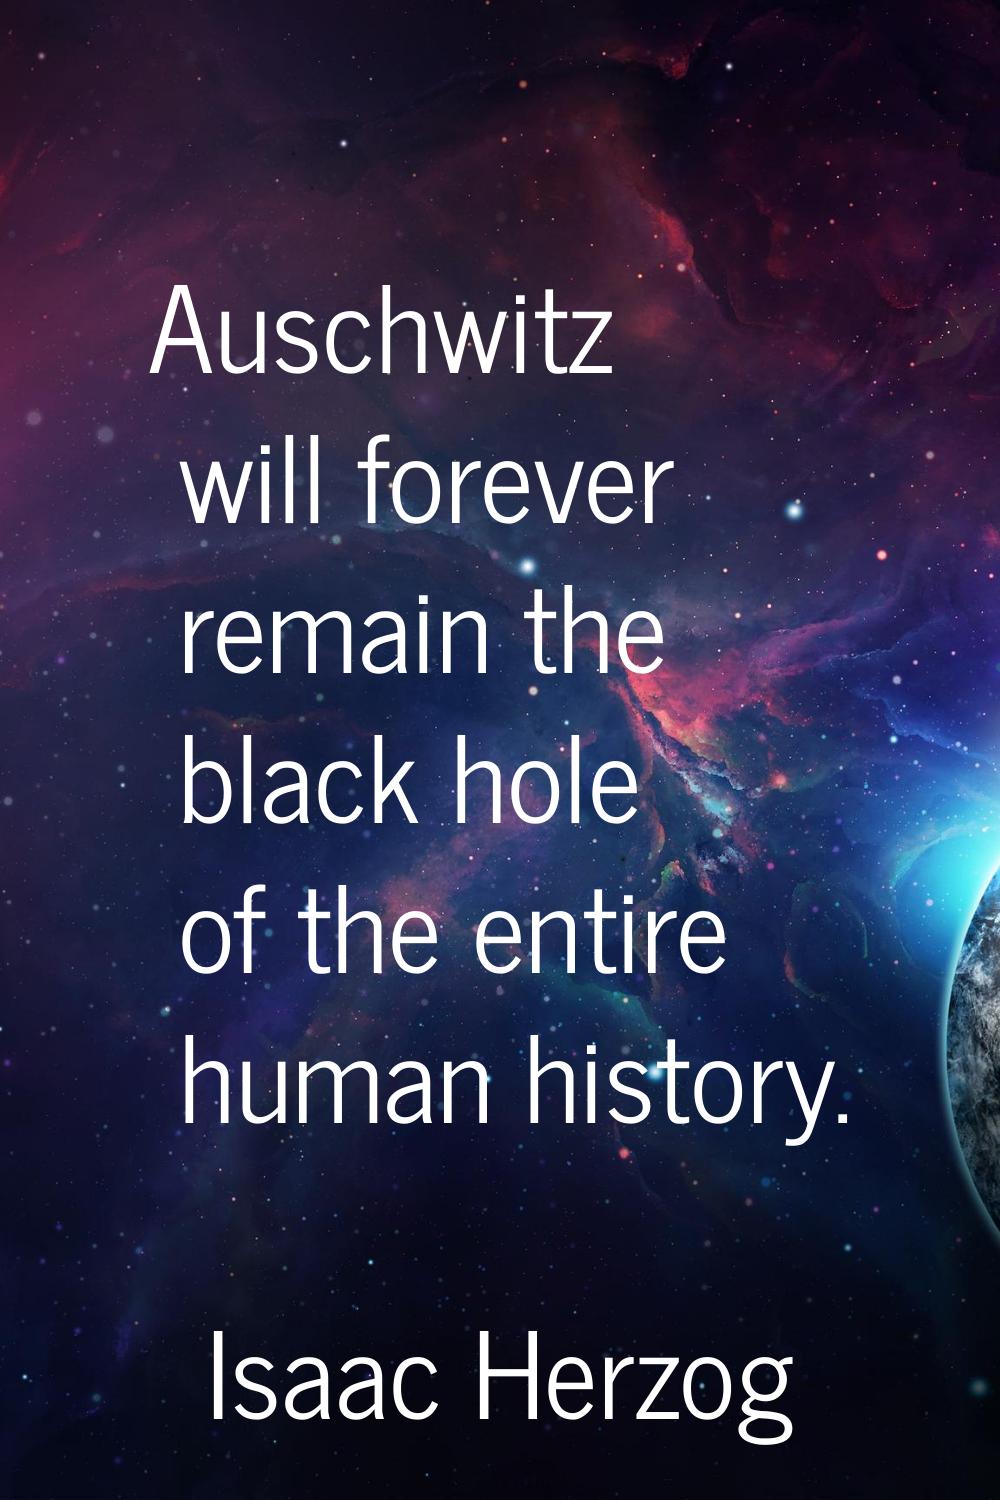 Auschwitz will forever remain the black hole of the entire human history.